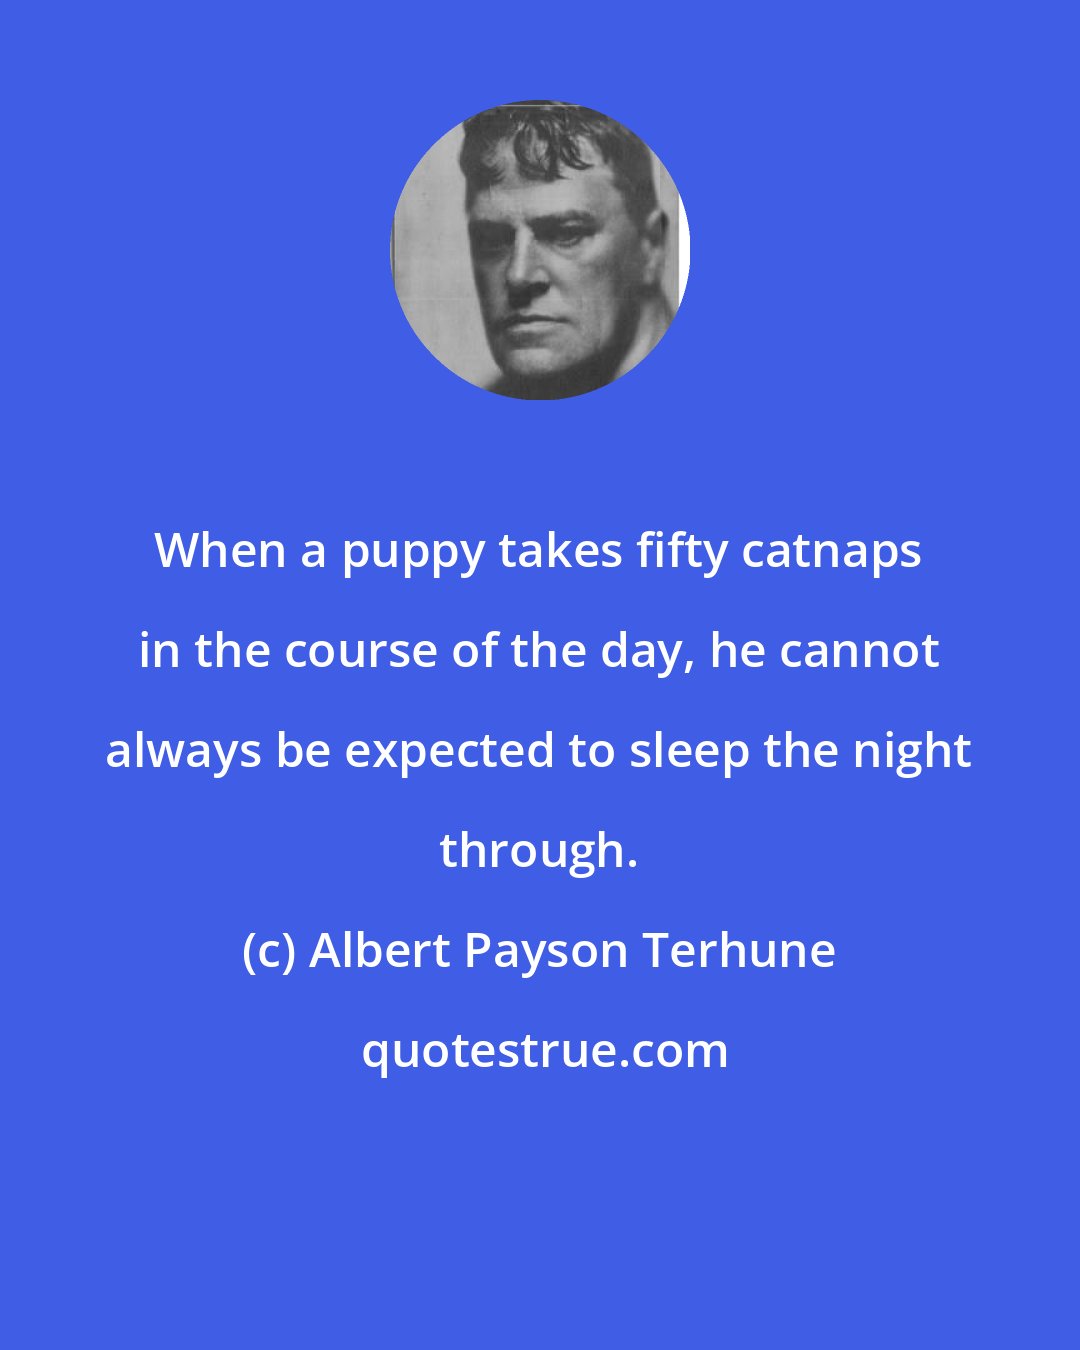 Albert Payson Terhune: When a puppy takes fifty catnaps in the course of the day, he cannot always be expected to sleep the night through.